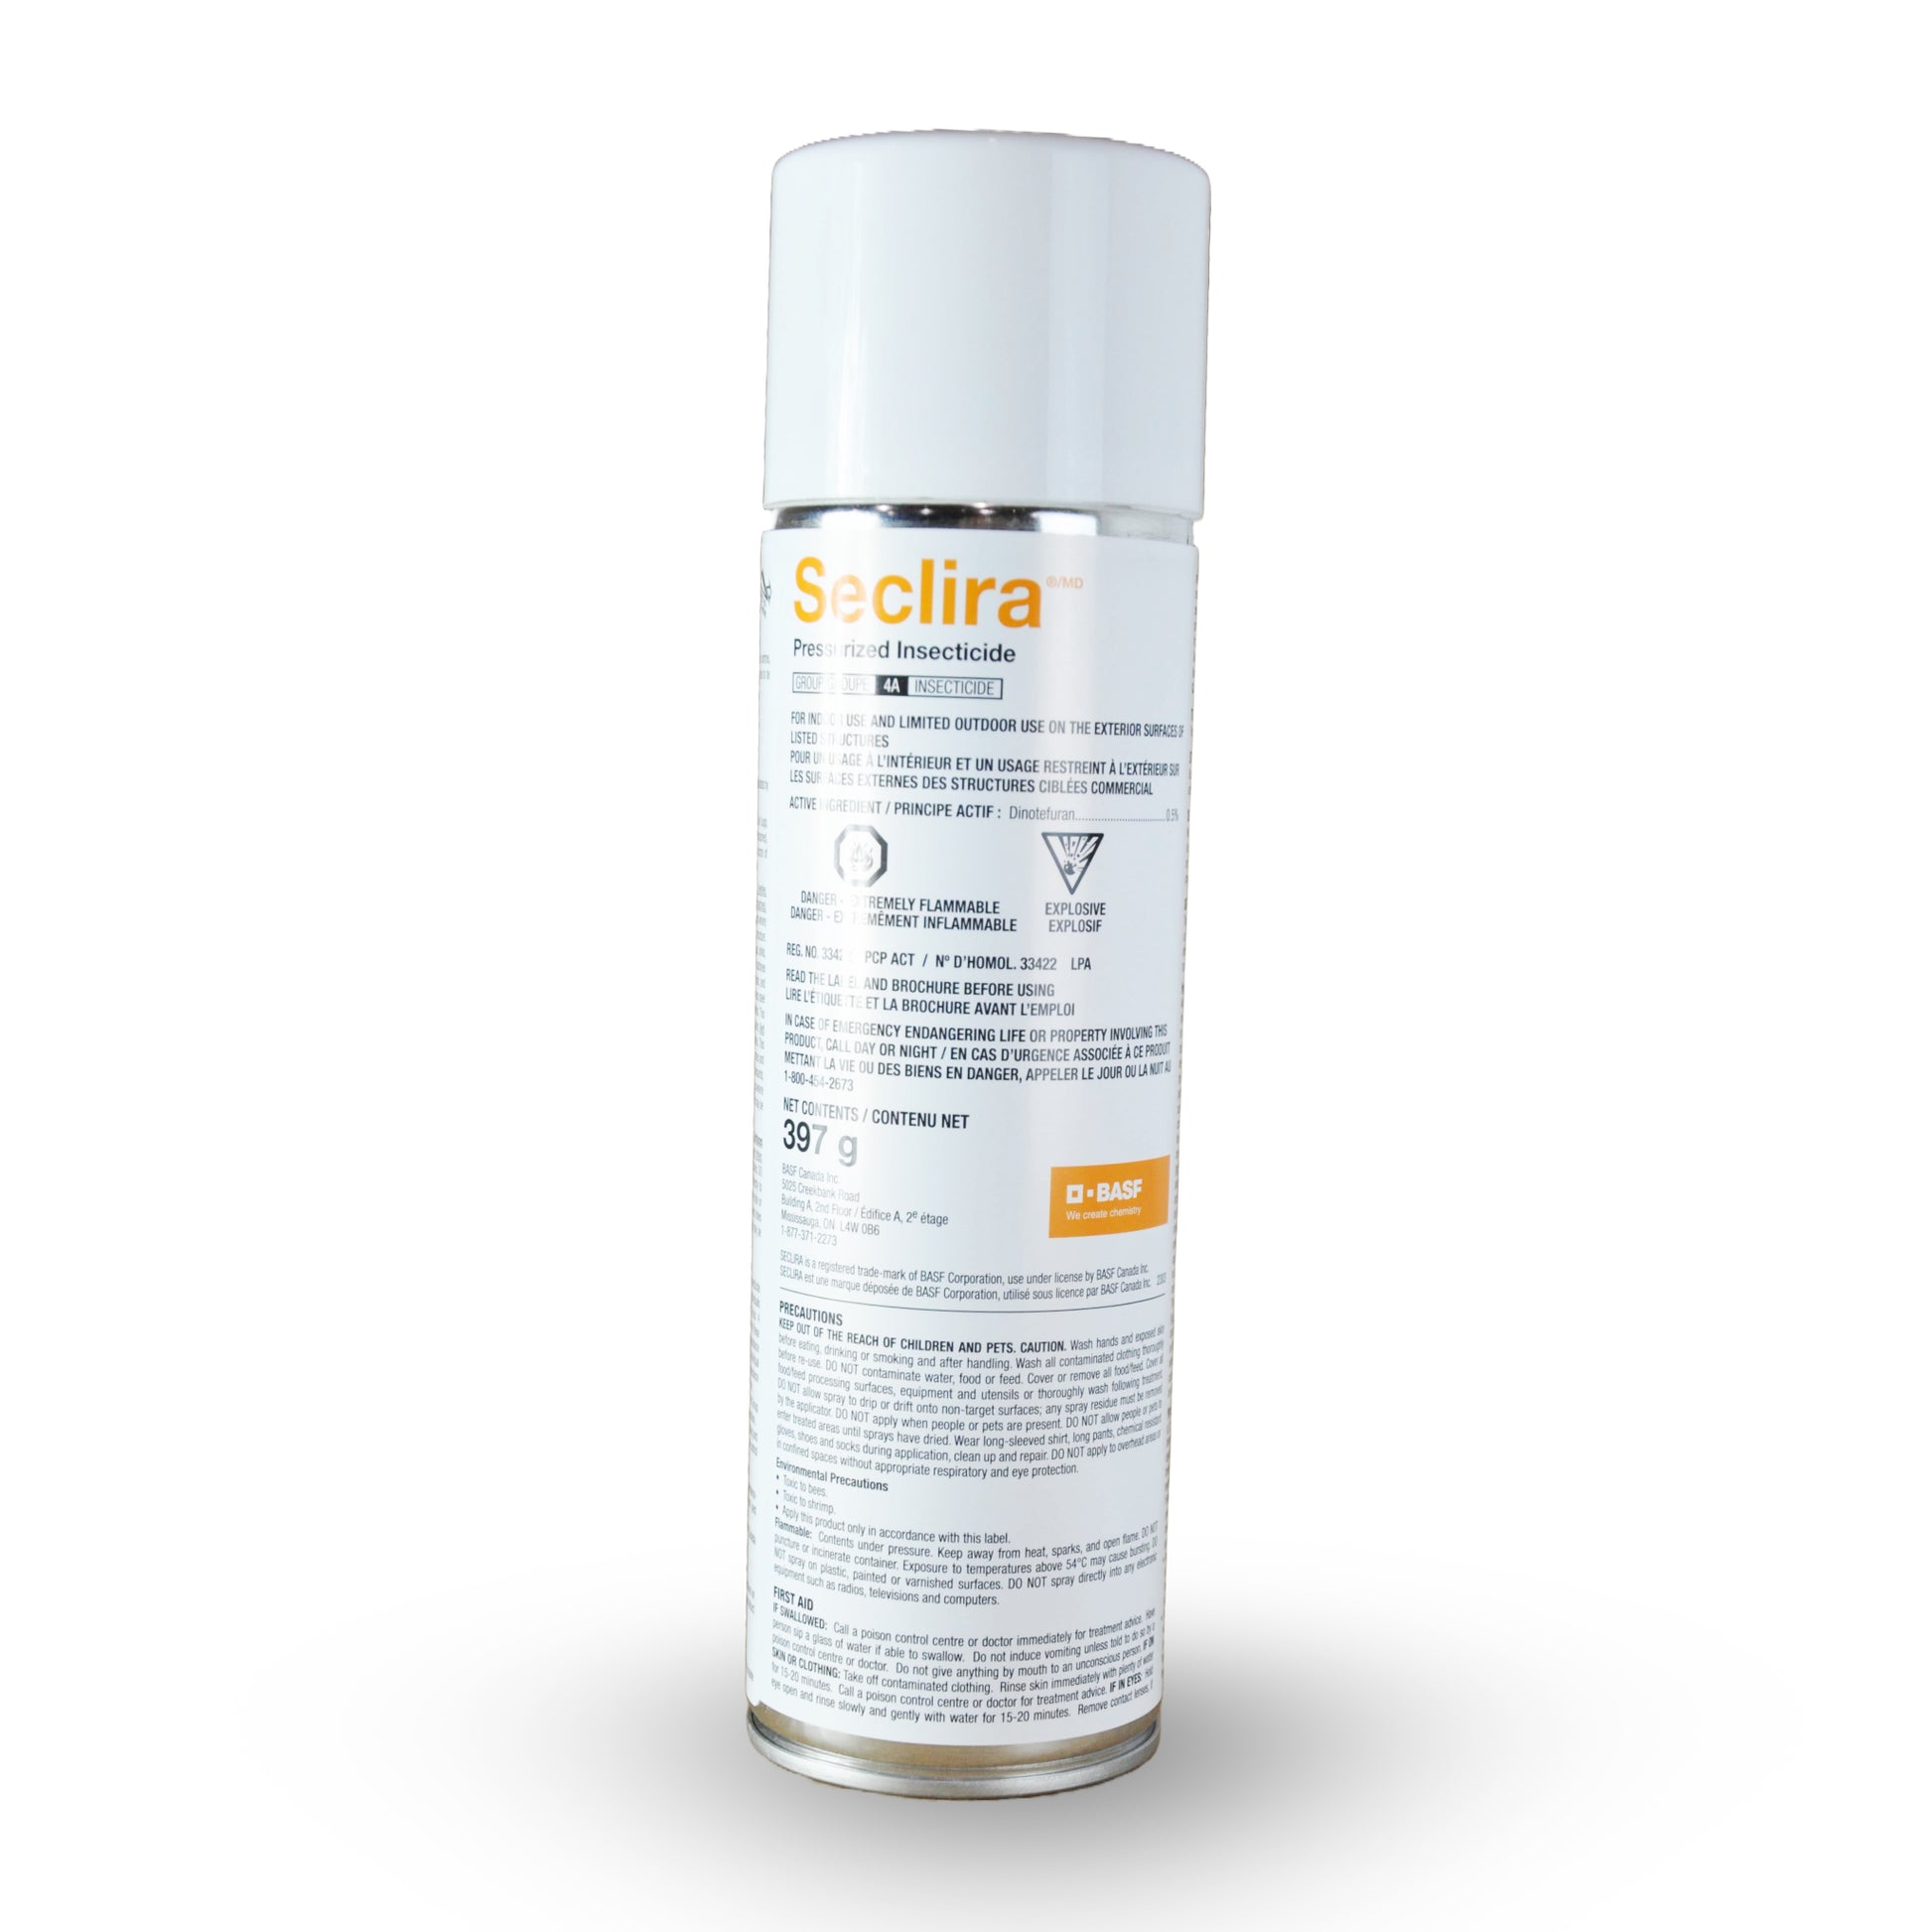 Seclira Insecticide Sous Pression 397g